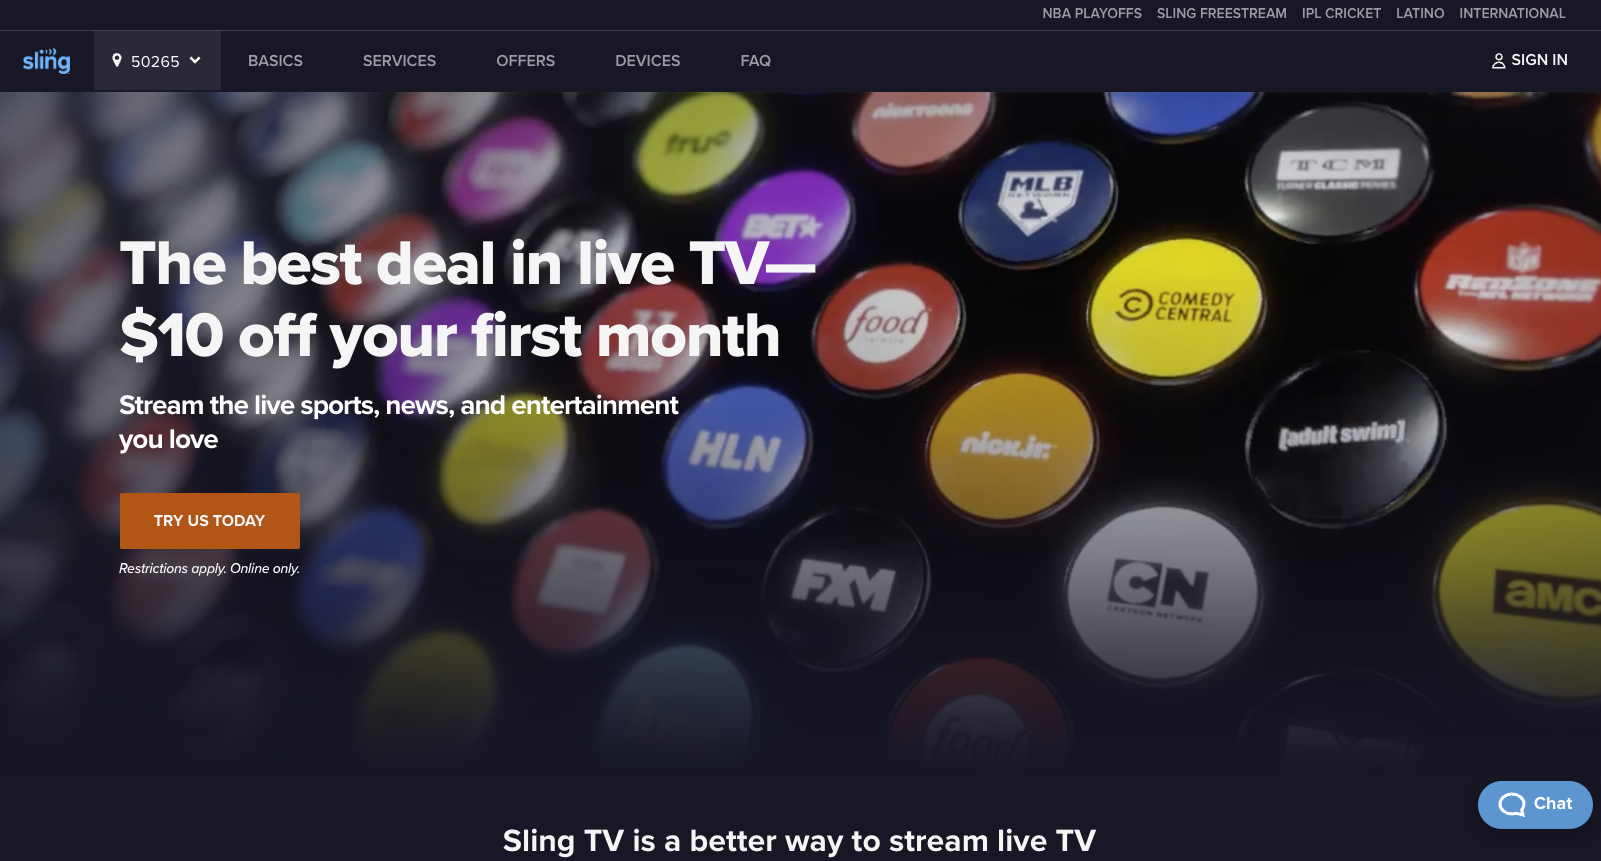 Sling TV is a popular IPTV provider that offers two different plans labeled “Sling Orange” and “Sling Blue” which both cost $35/month.